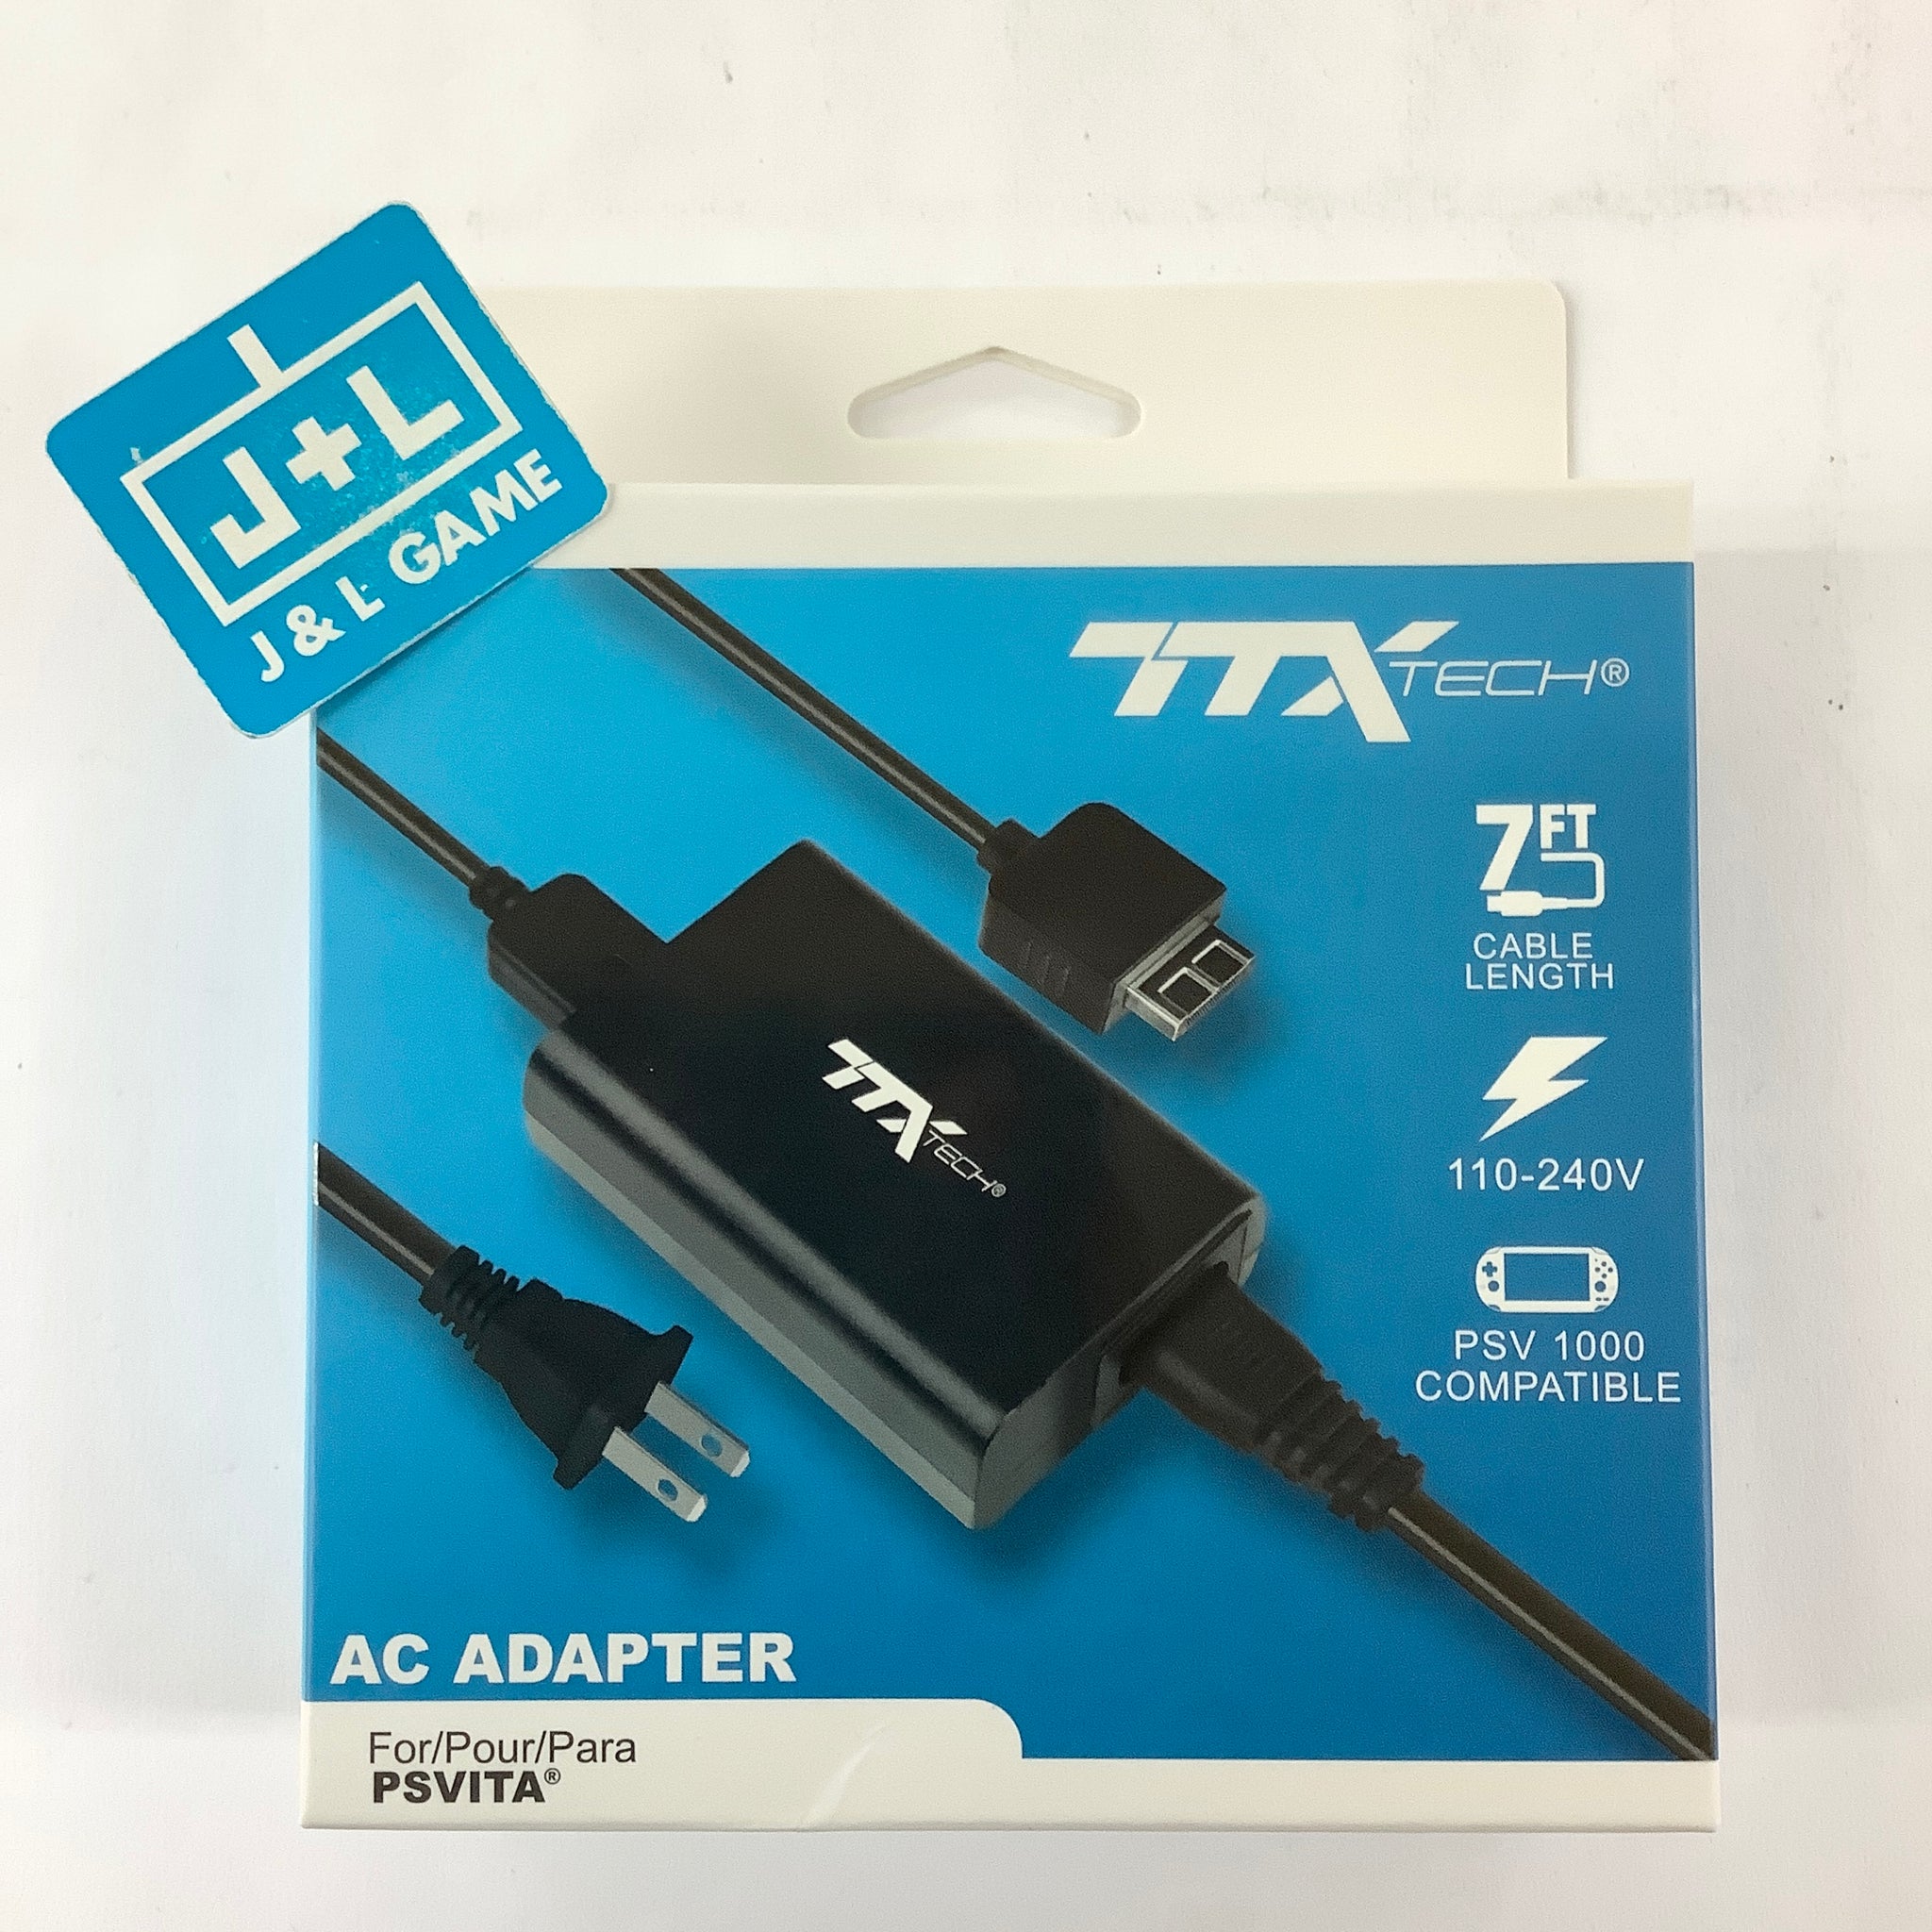 TTX Tech AC Adapter for PS Vita - (PSV) PlayStation Vita Accessories Tomee   